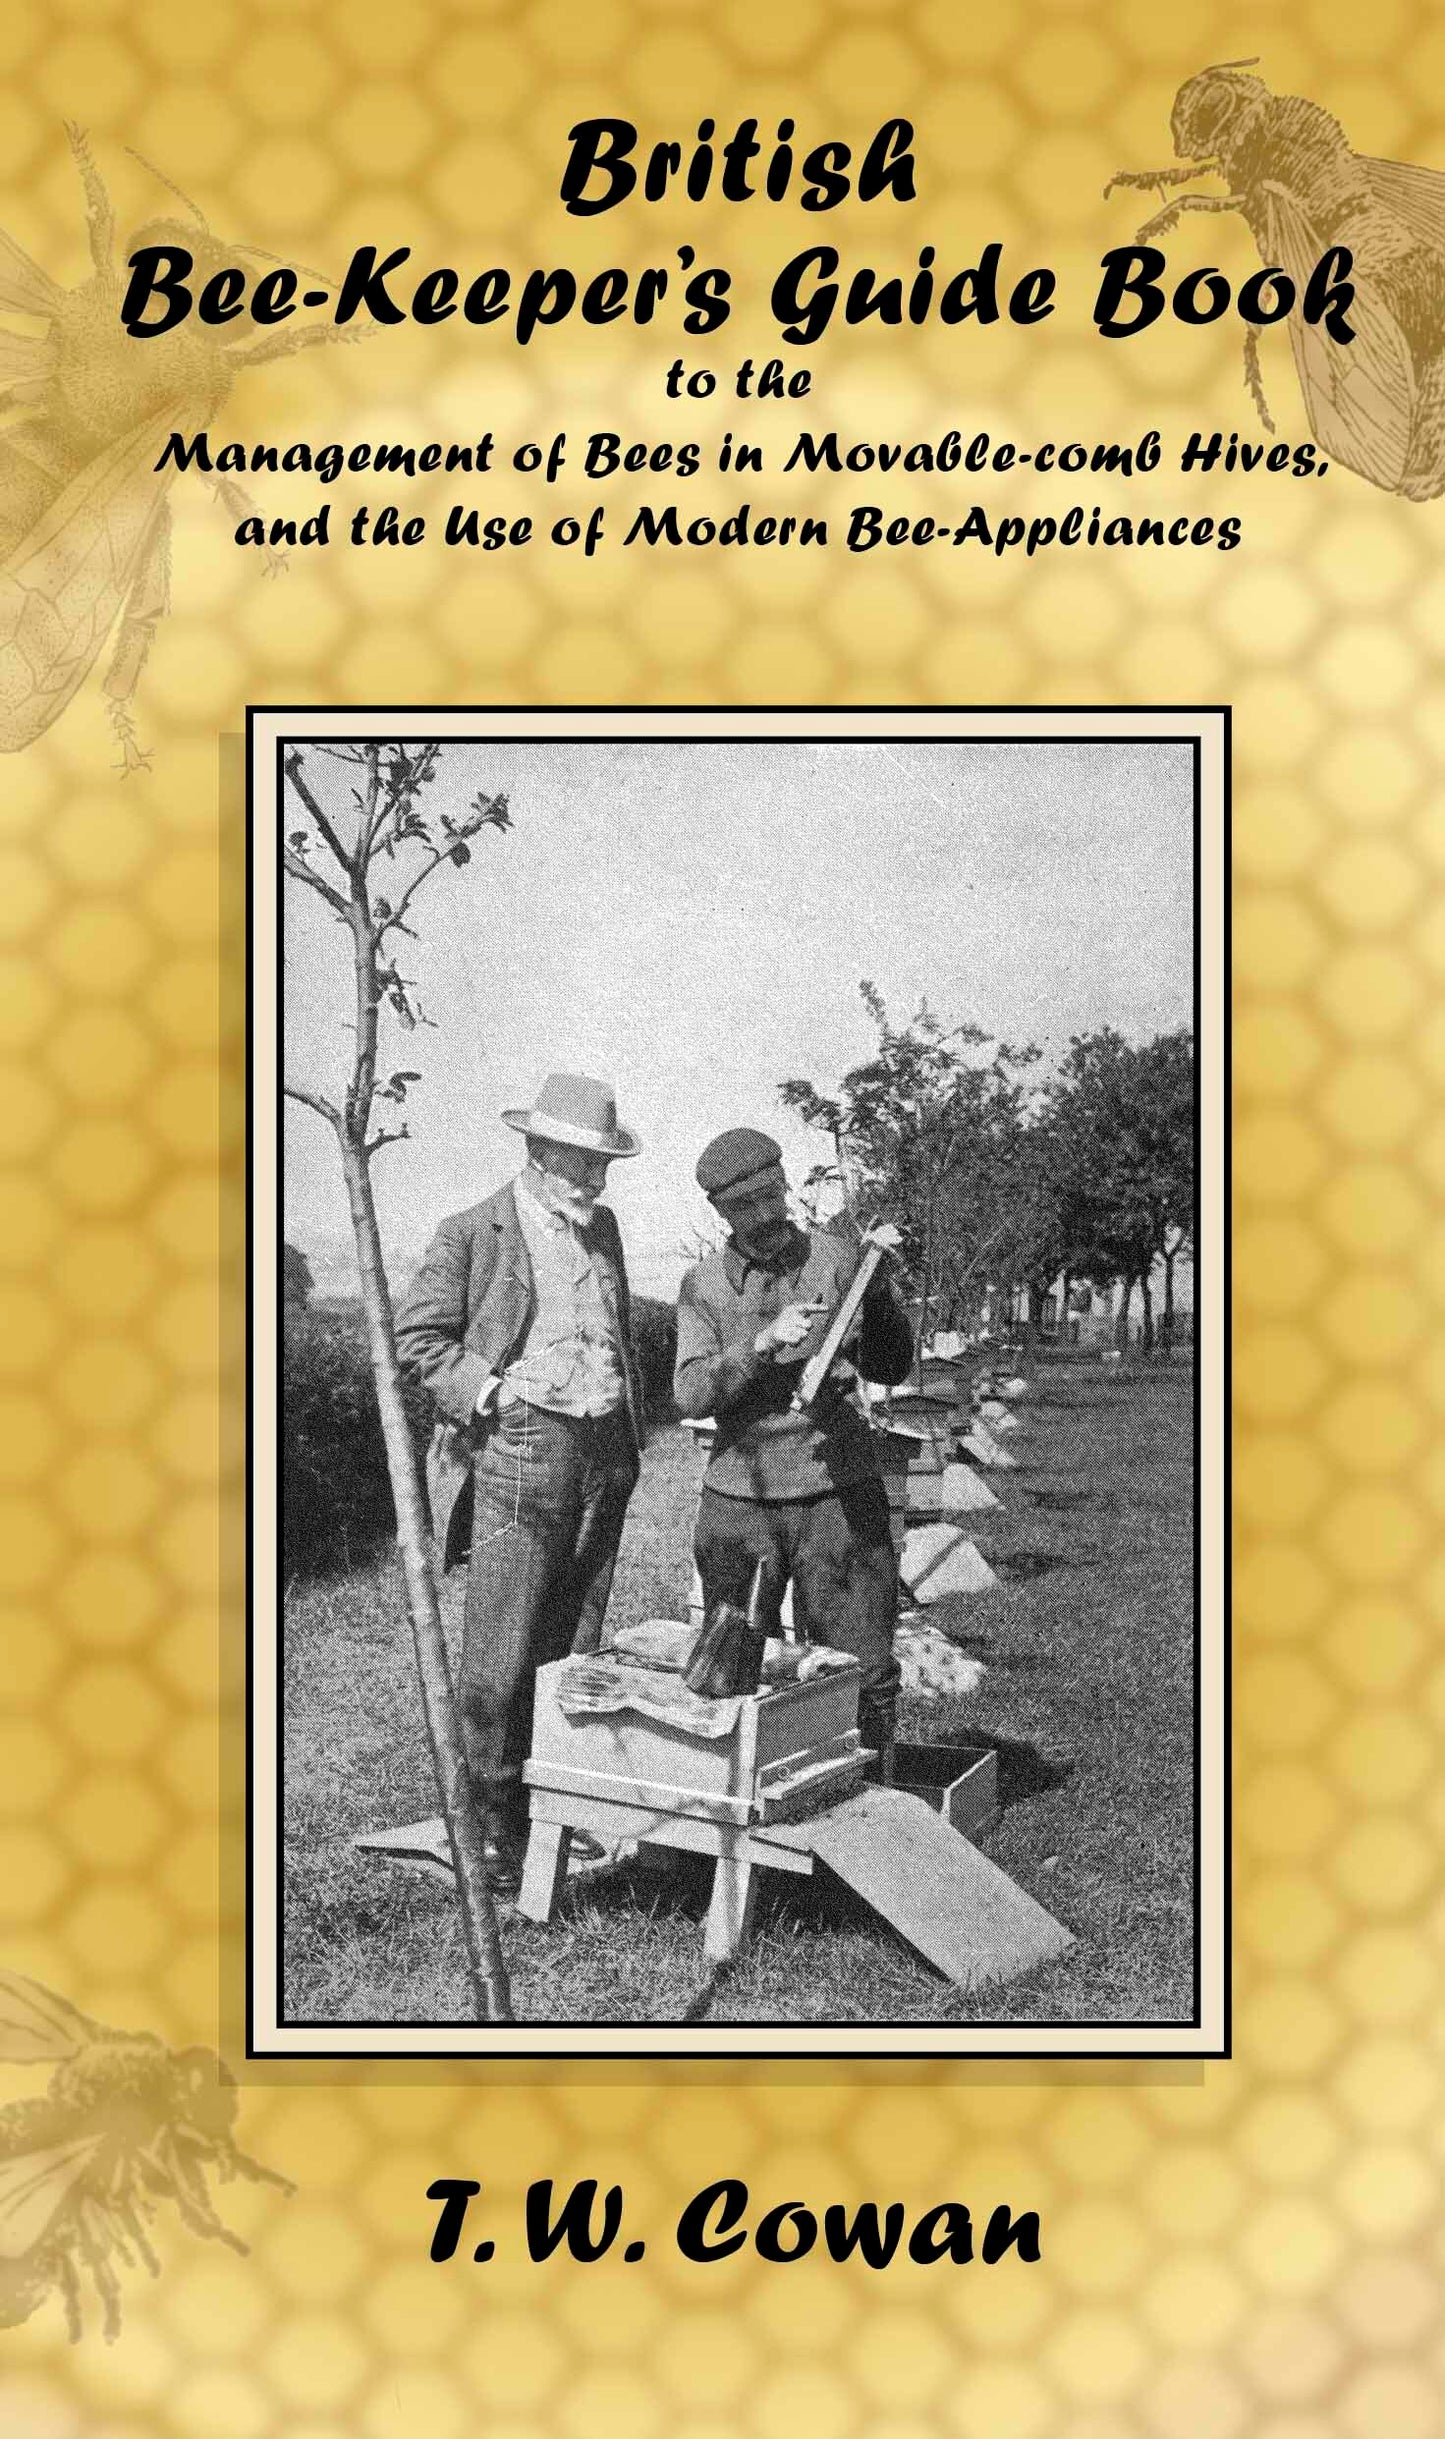 British Bee-Keeper's Guide Book